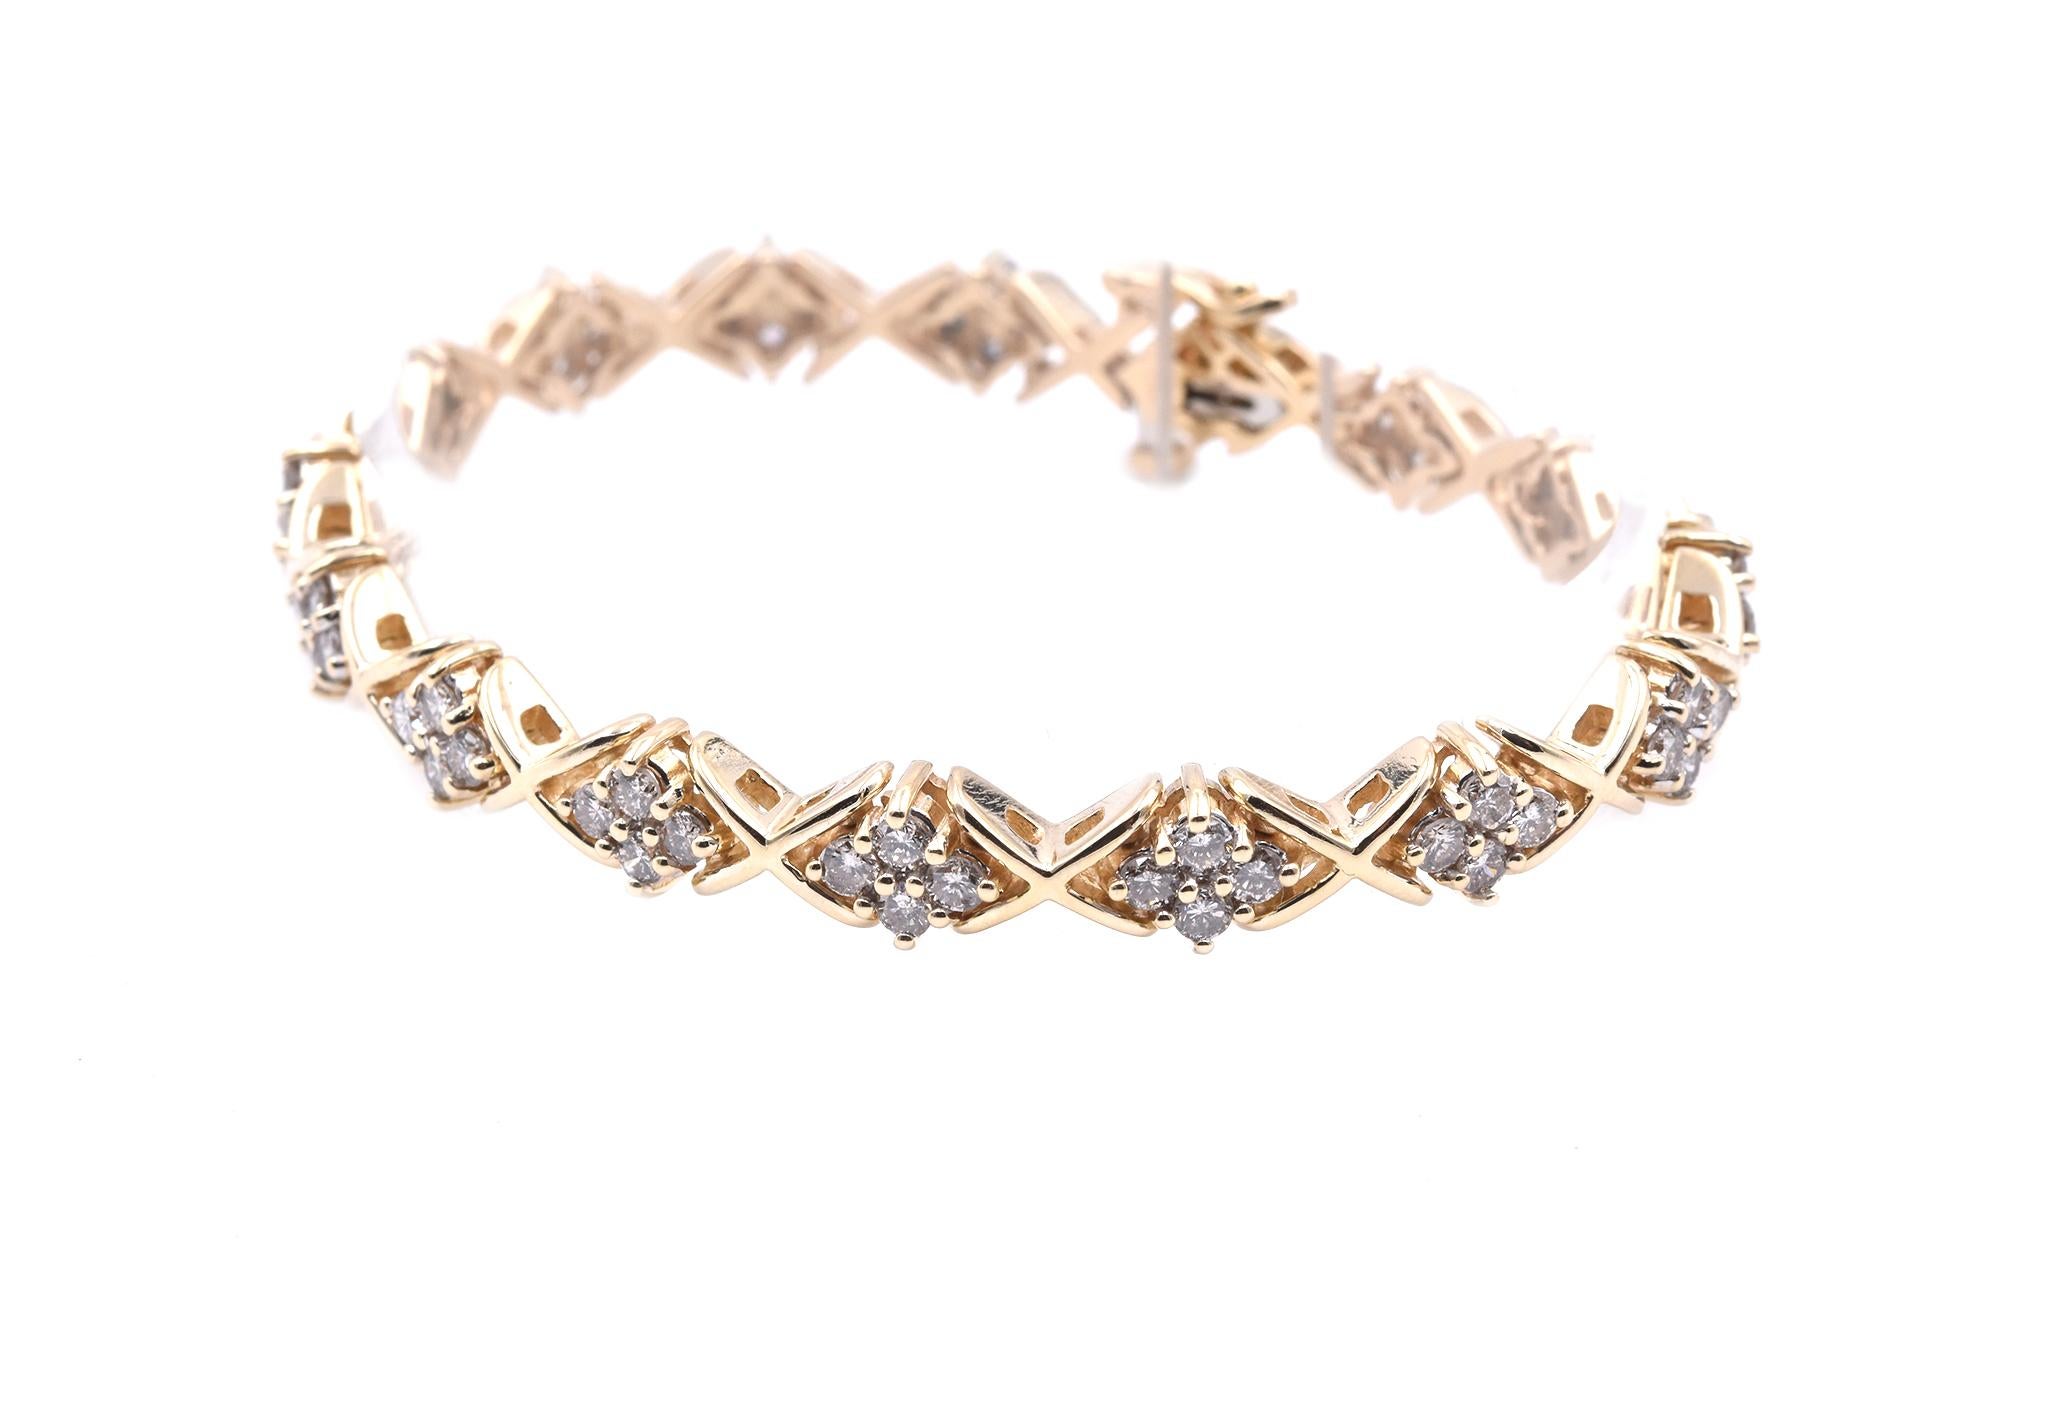 Designer: custom
Material: 14K Yellow Gold
Round Diamonds: 64 round brilliant cuts = 3.20cttw
Color: H
Clarity: SI1-2
Dimensions: the bracelet measures 7.5-inches in length 
Weight: 24.45 grams